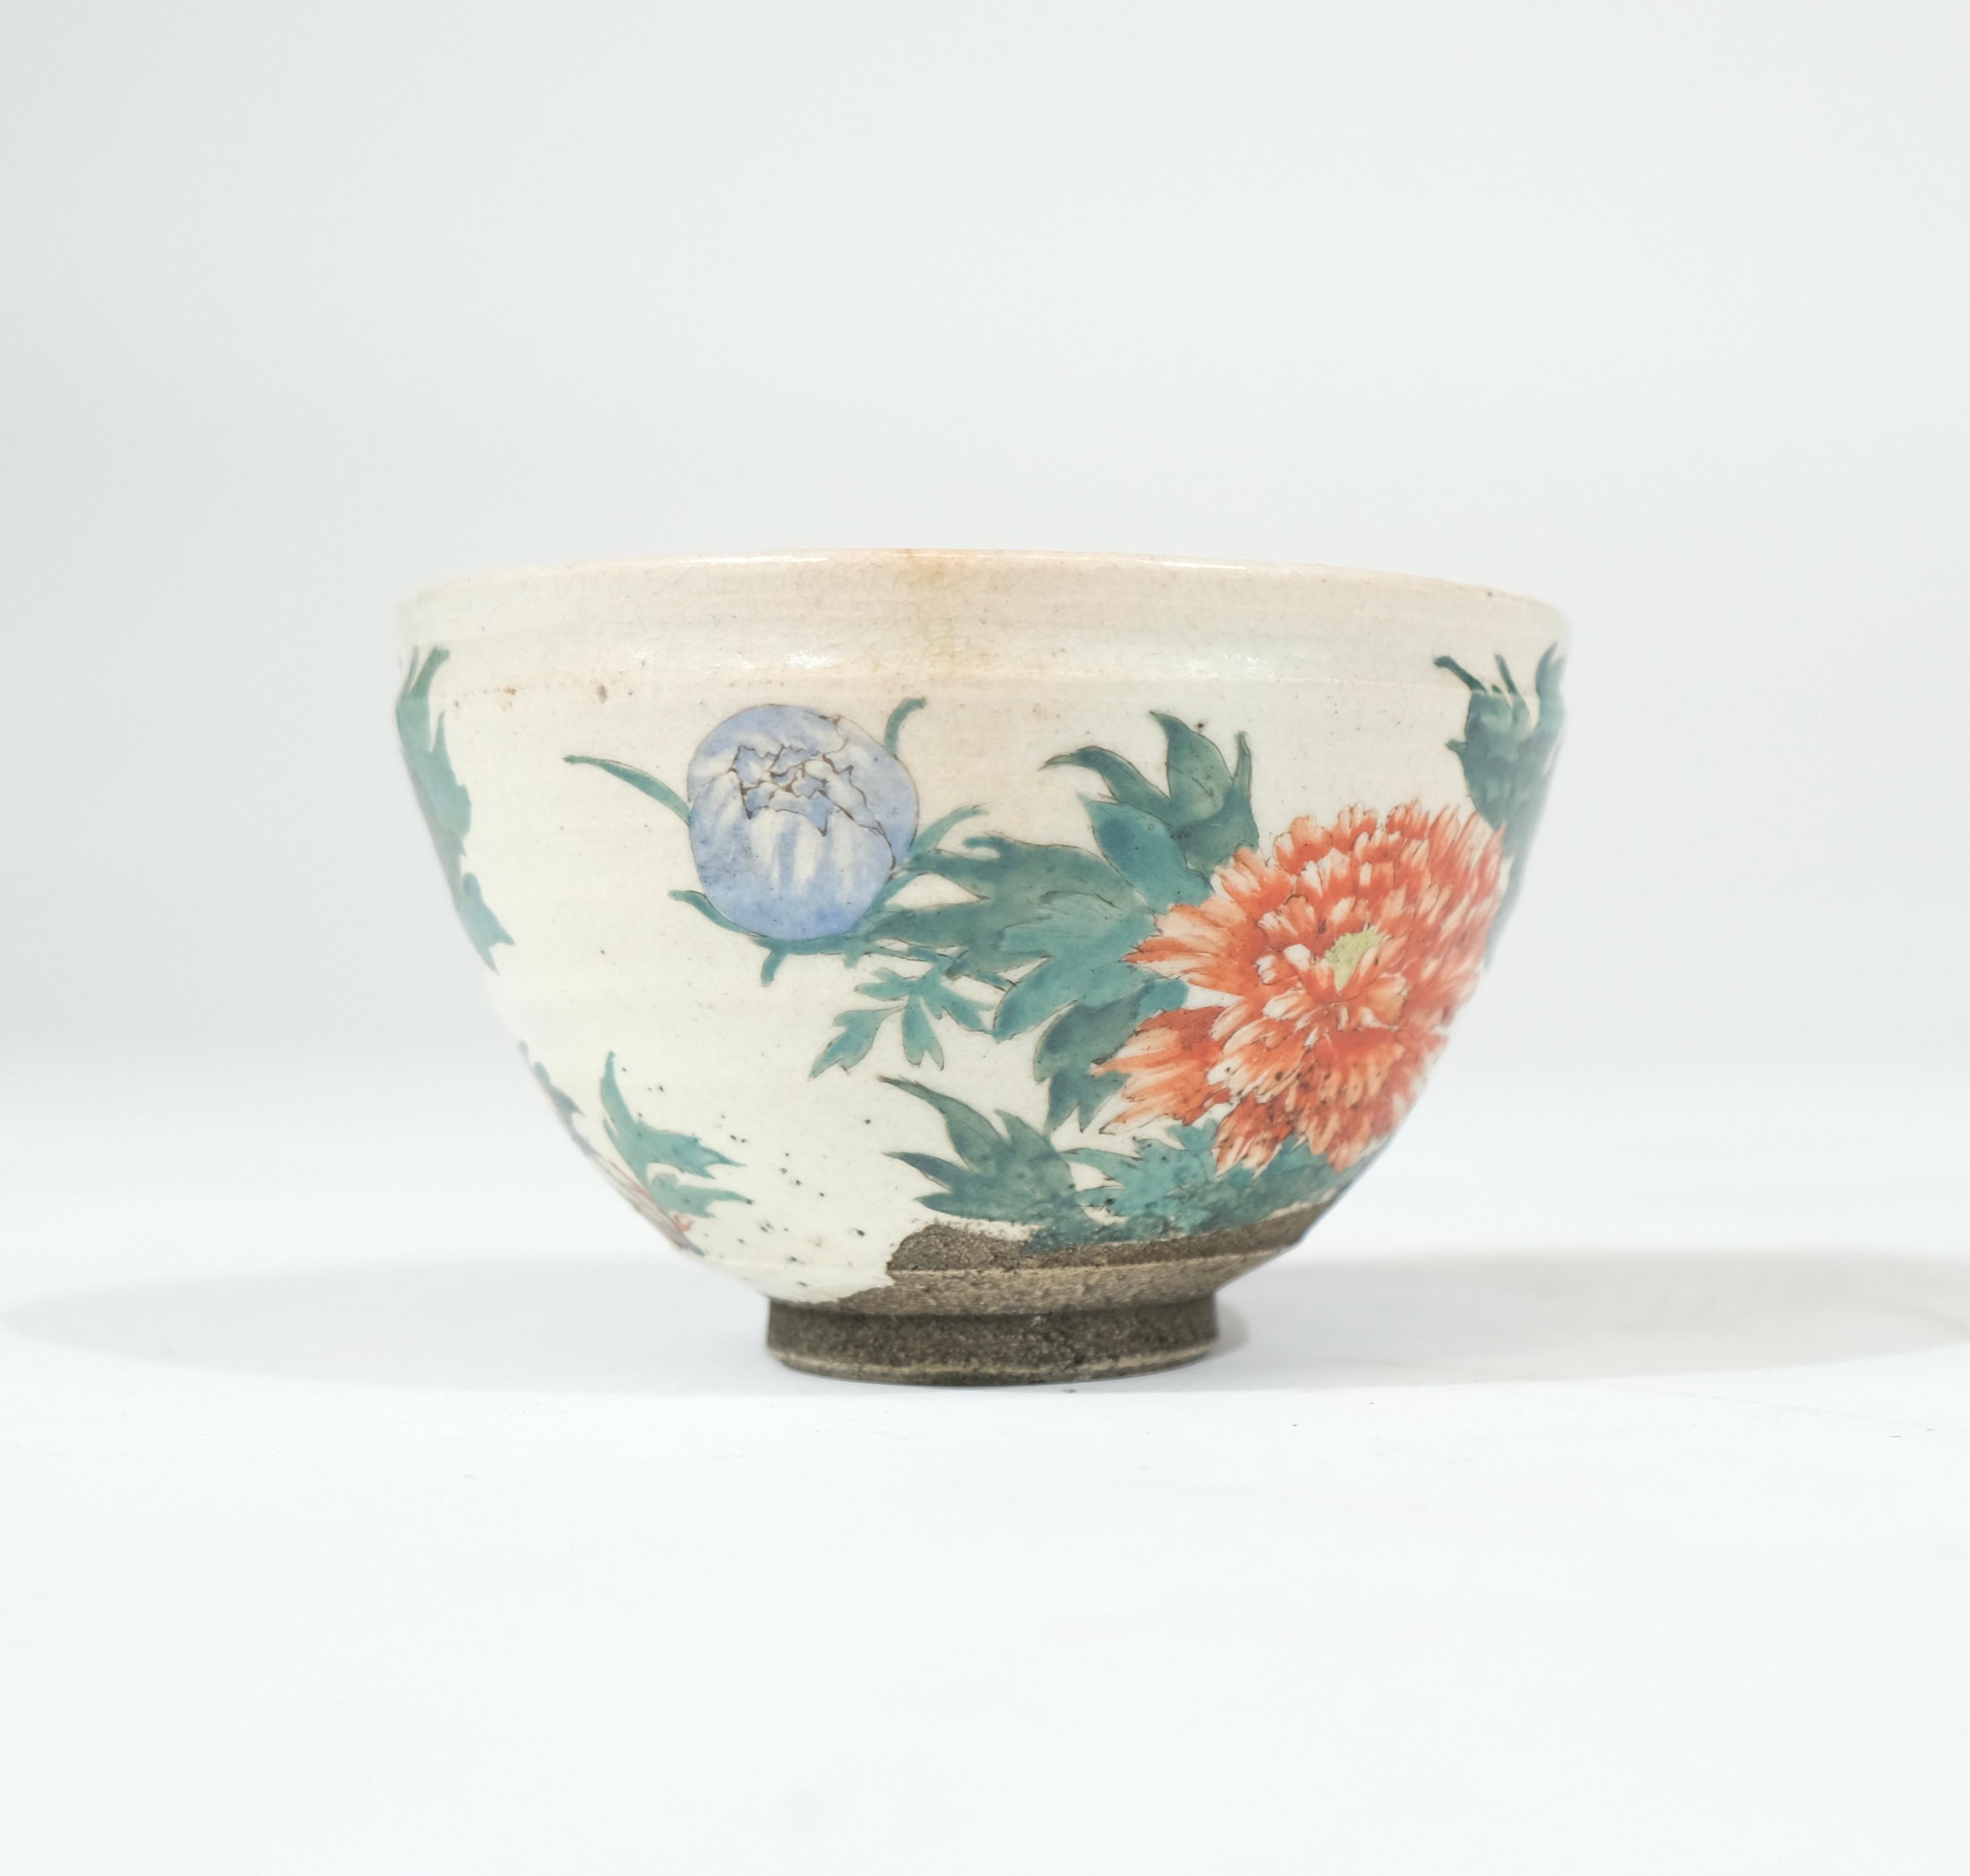 Ceramic Japanese Glazed Tea Bowl with Floral Decoration. A so called Chawan. For Sale